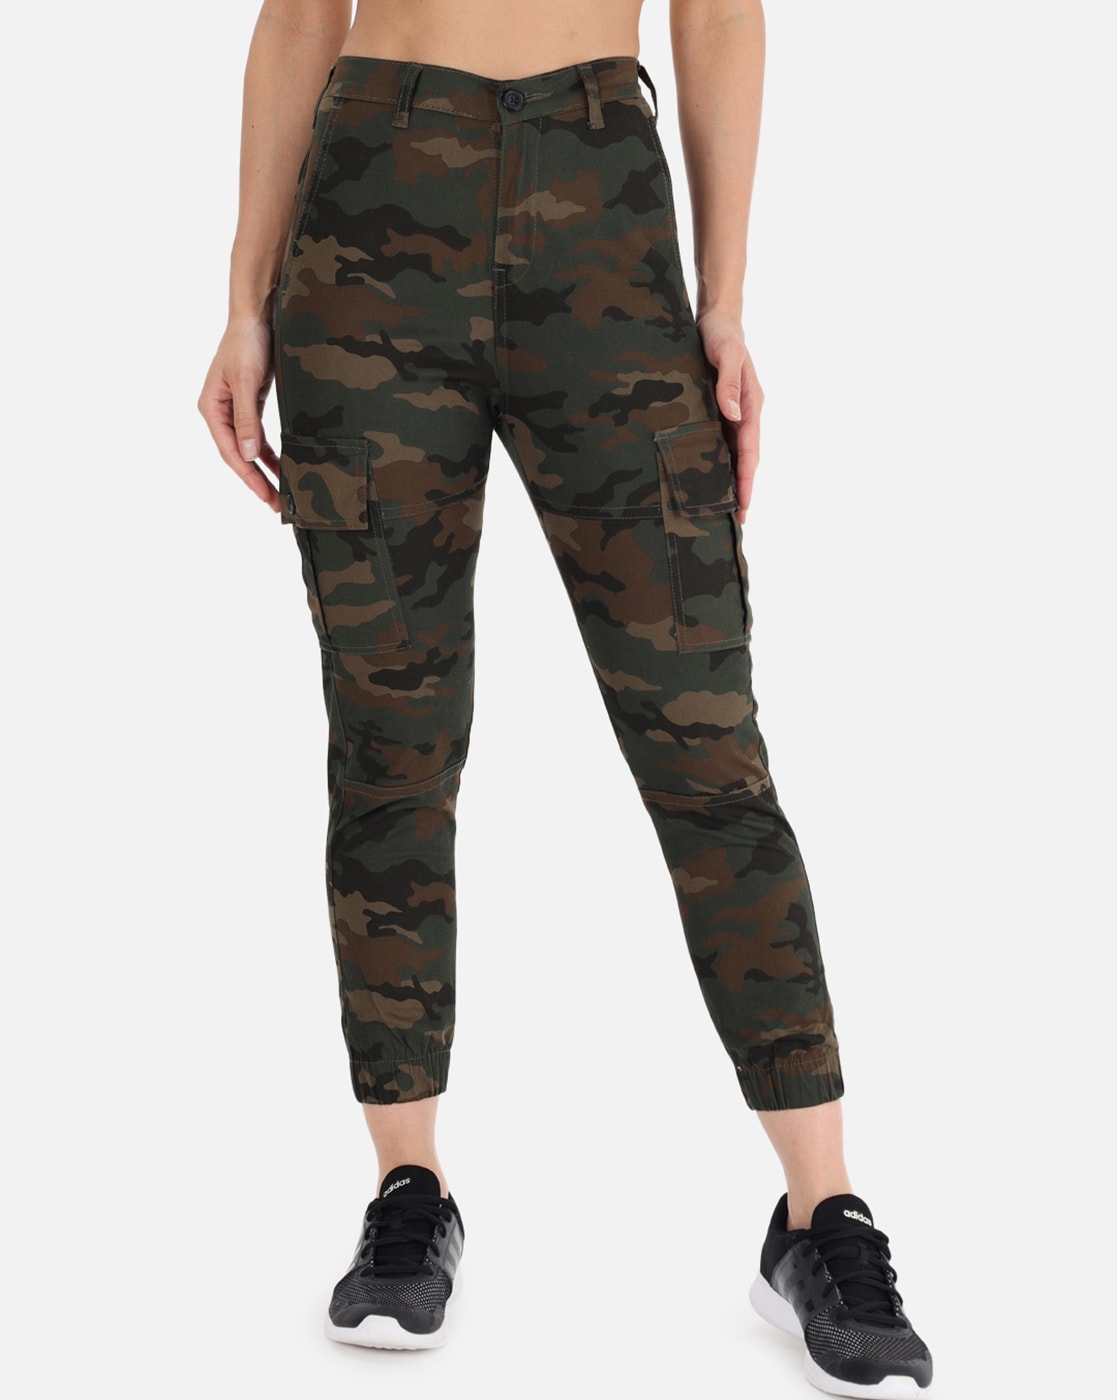 Amazoncom Womens Camo Cargo Pants High Waist Camouflage Casual Long  Skinny Joggers with Pockets  Clothing Shoes  Jewelry